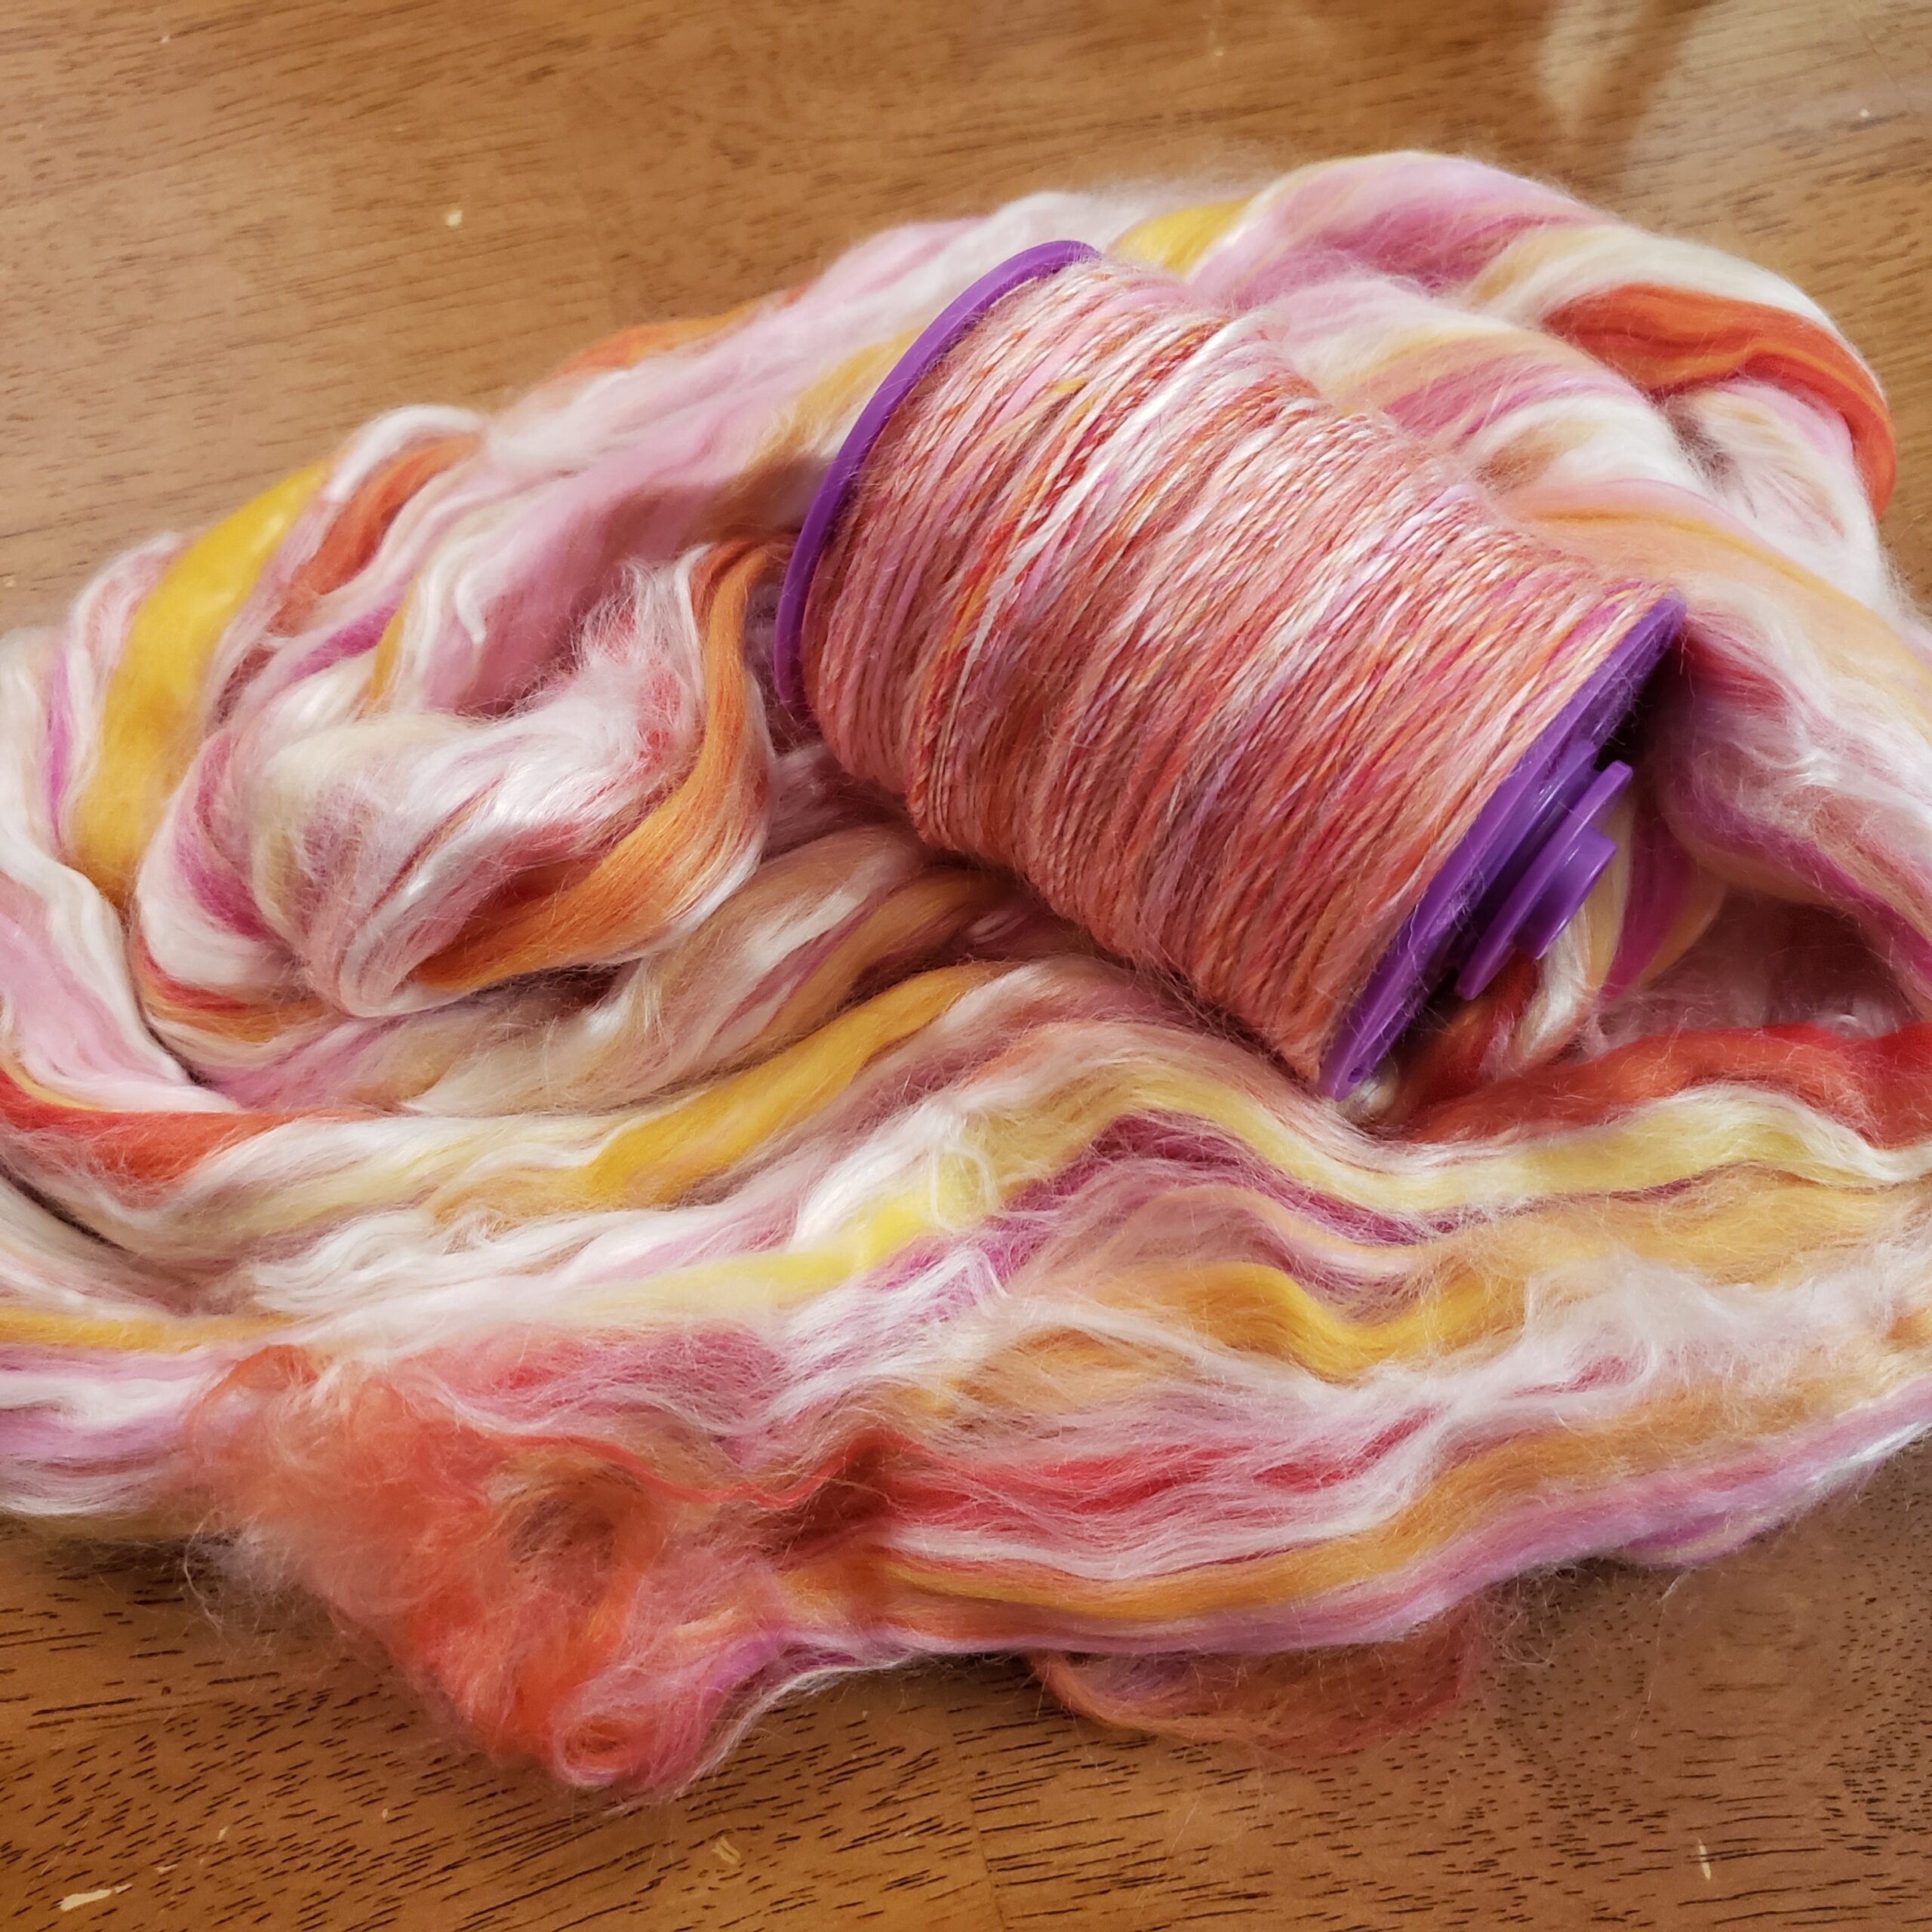 New Fiber Alert! How to Spin Yarn from Eco Nylon and Weave a Cute Notions Bag